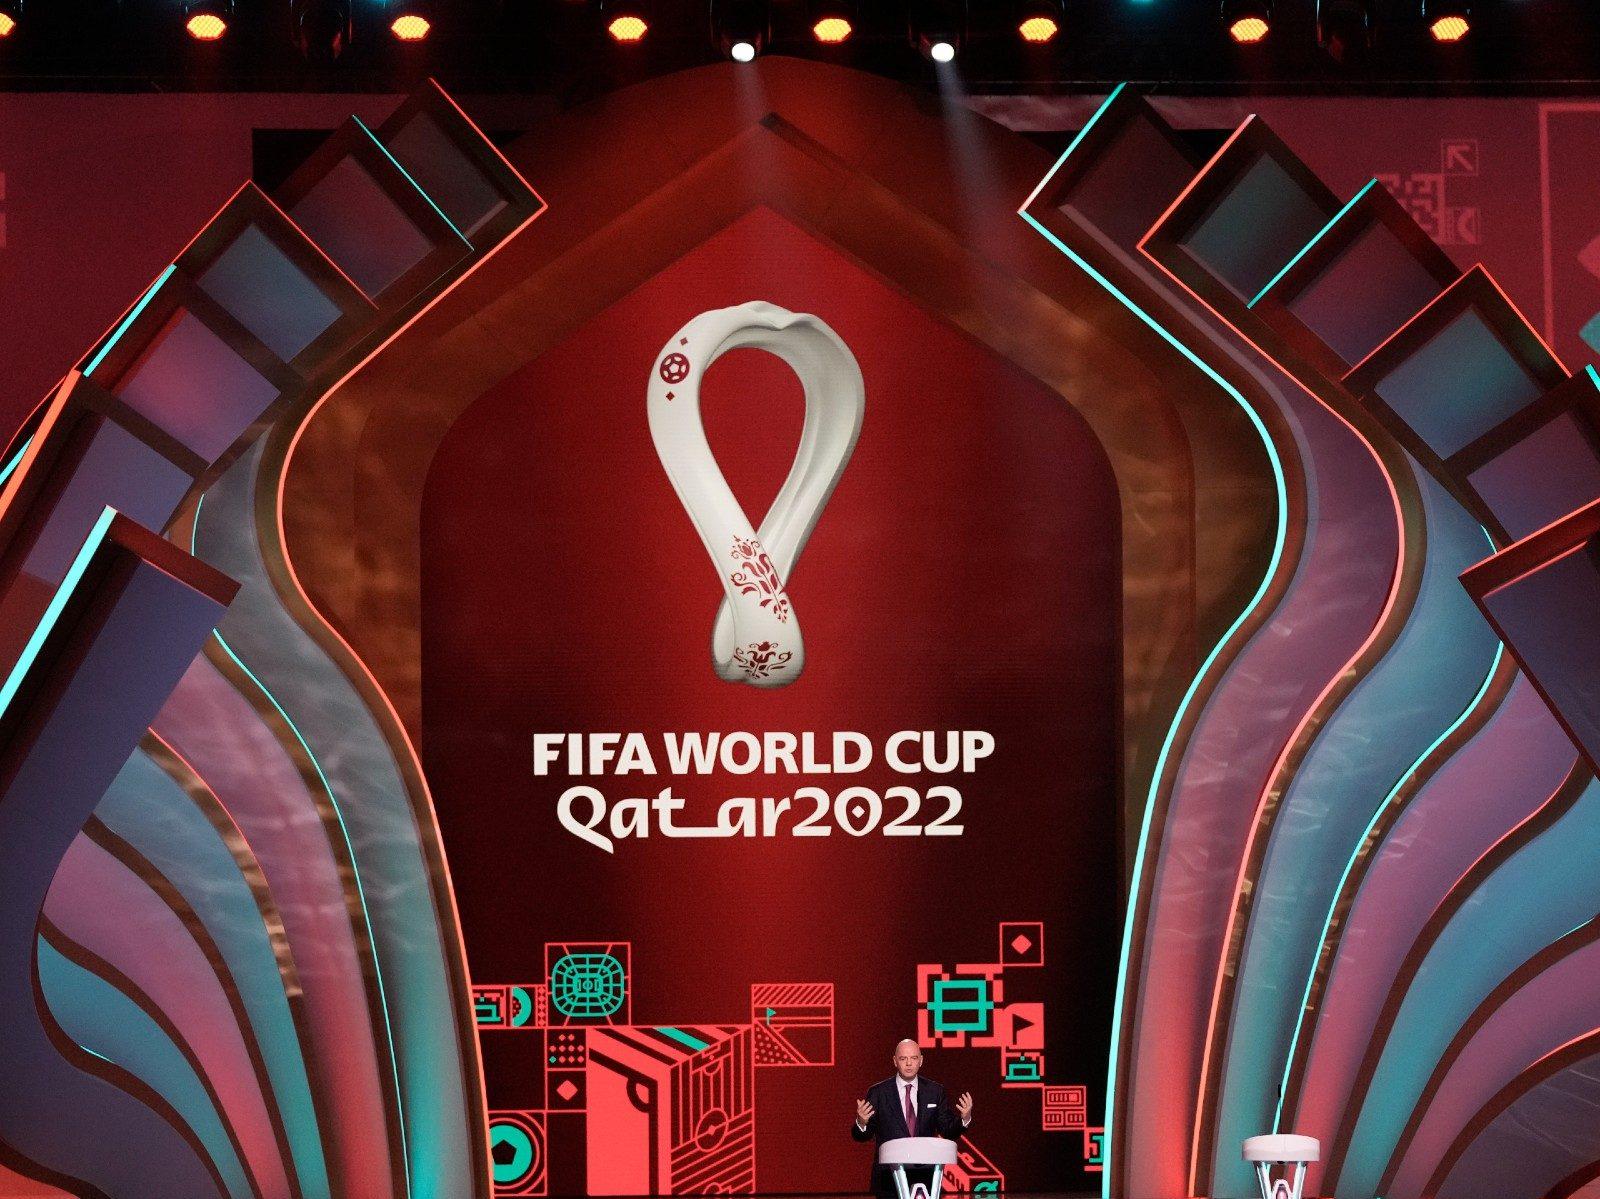 FIFA World Cup Qatar 2022 World Cup Group Stage Pairings